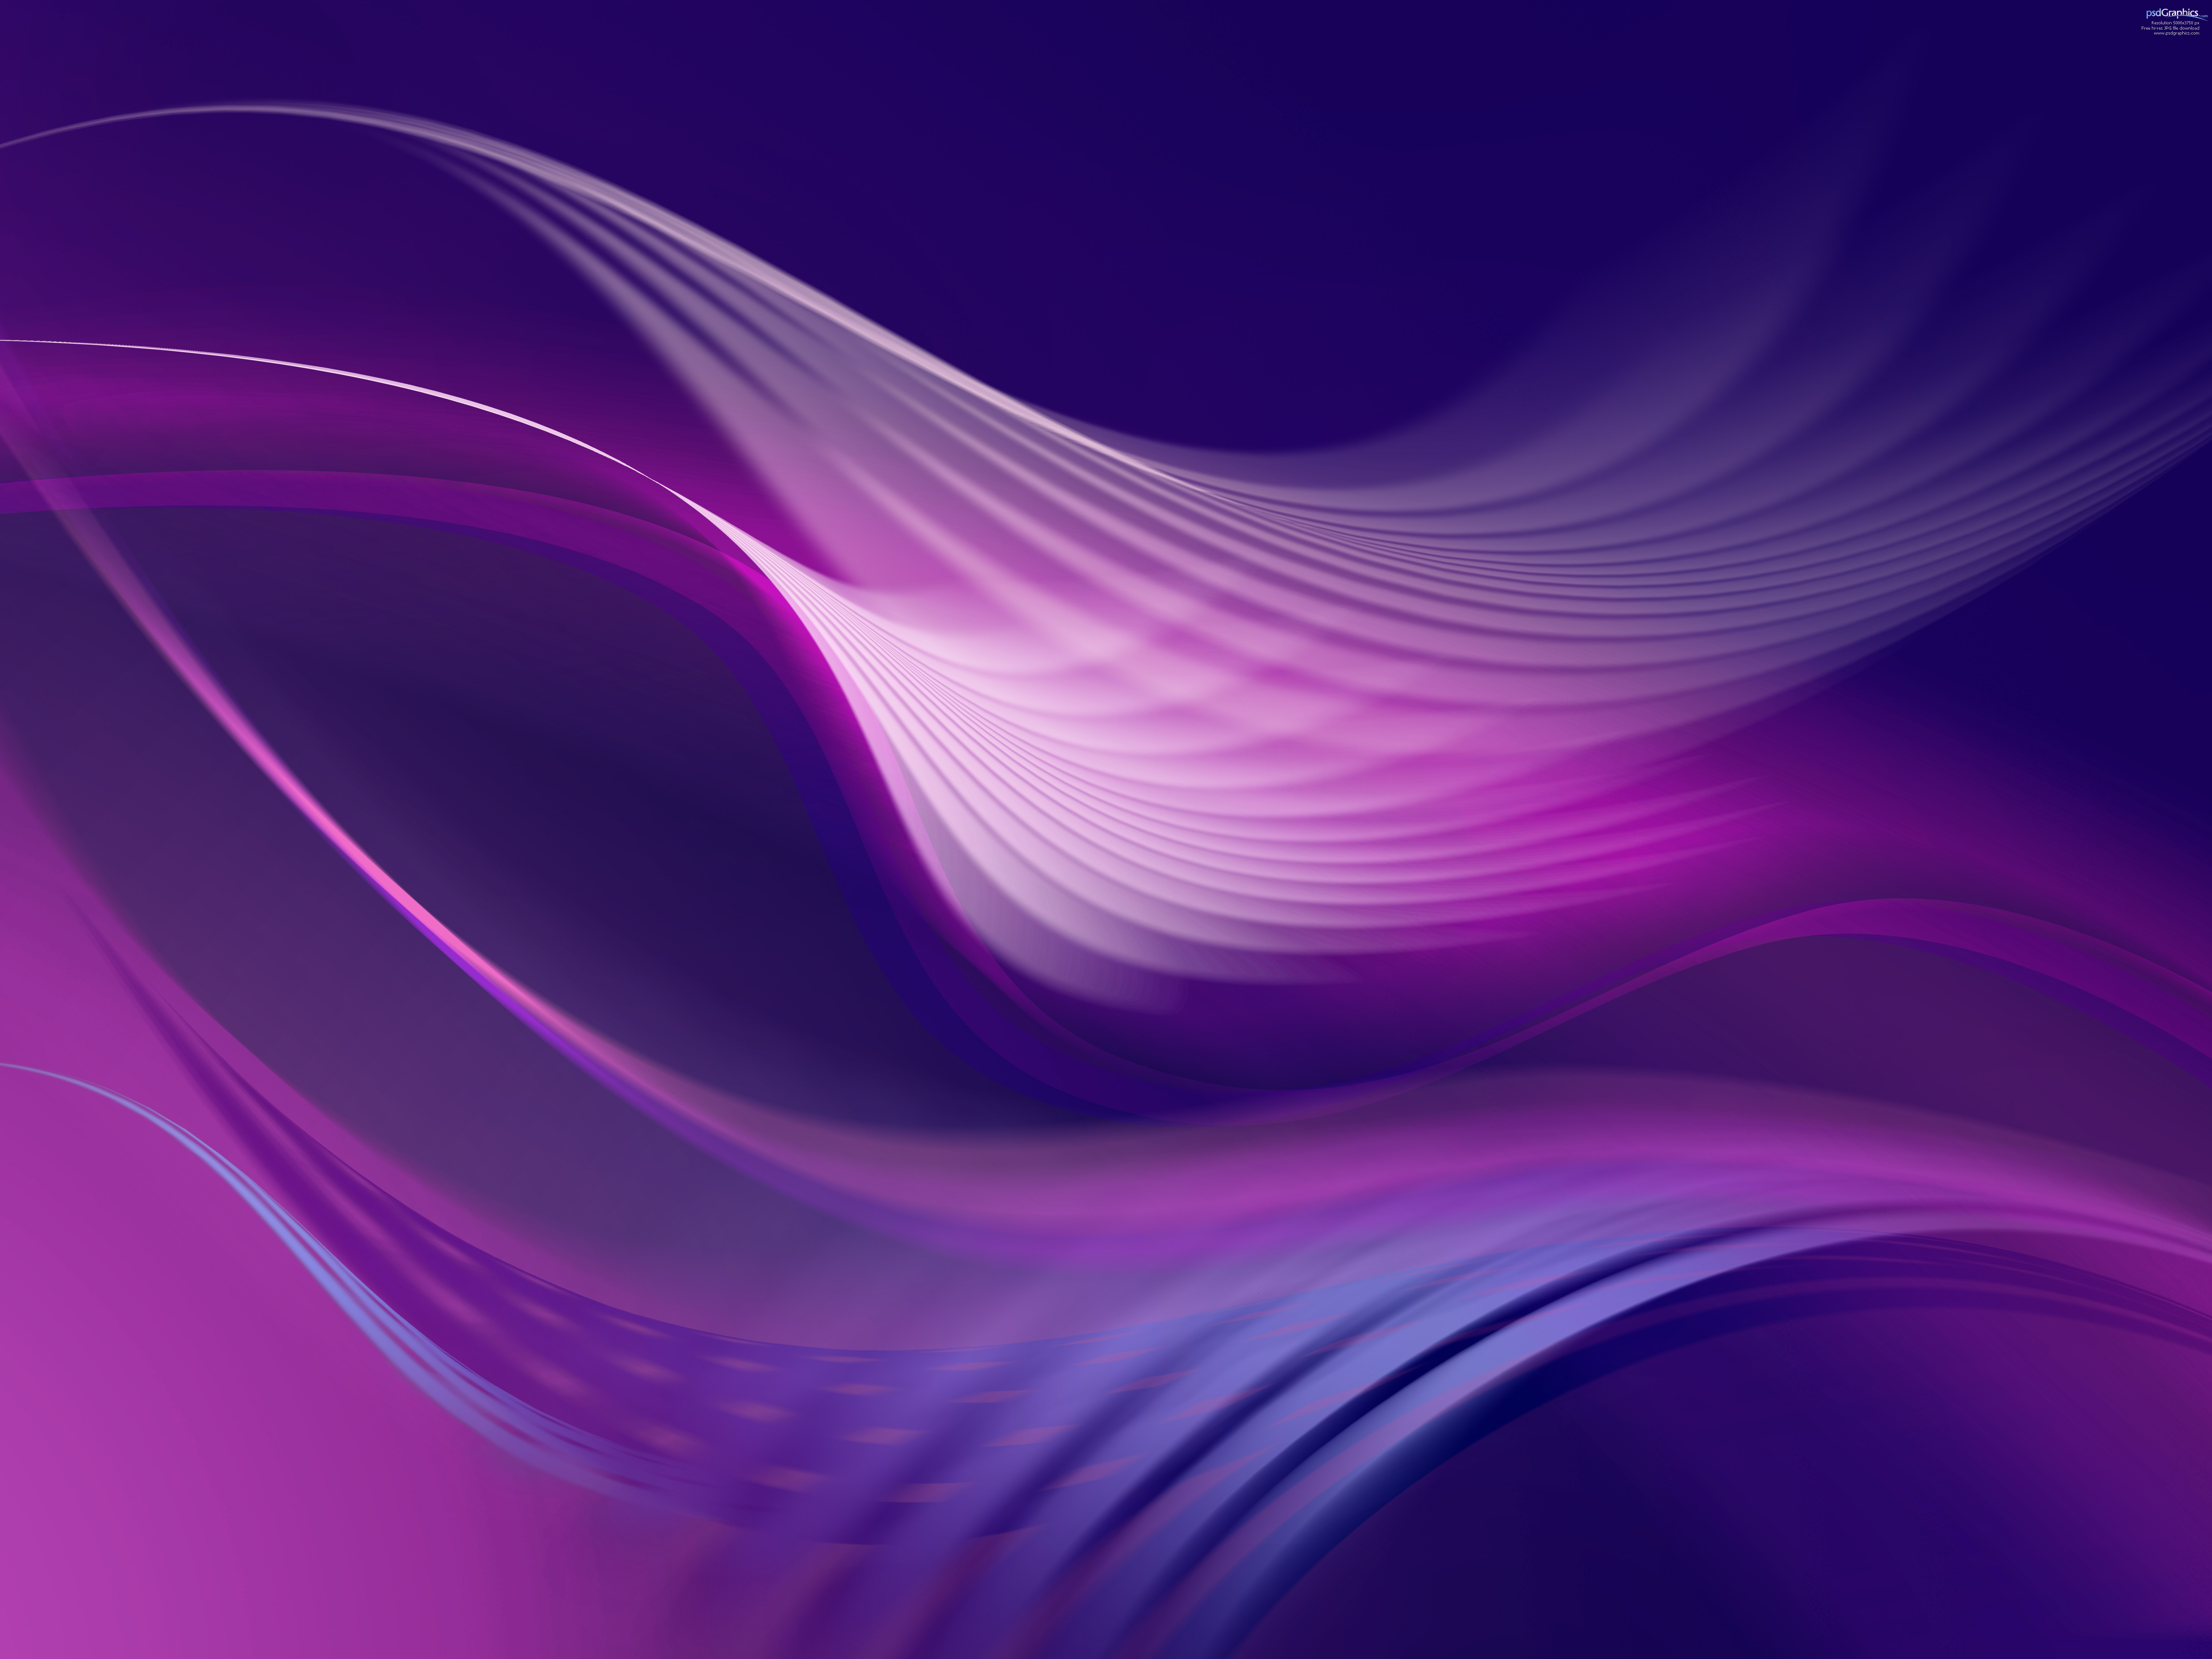 Purple And White Background Designs Top Pictures Gallery Online